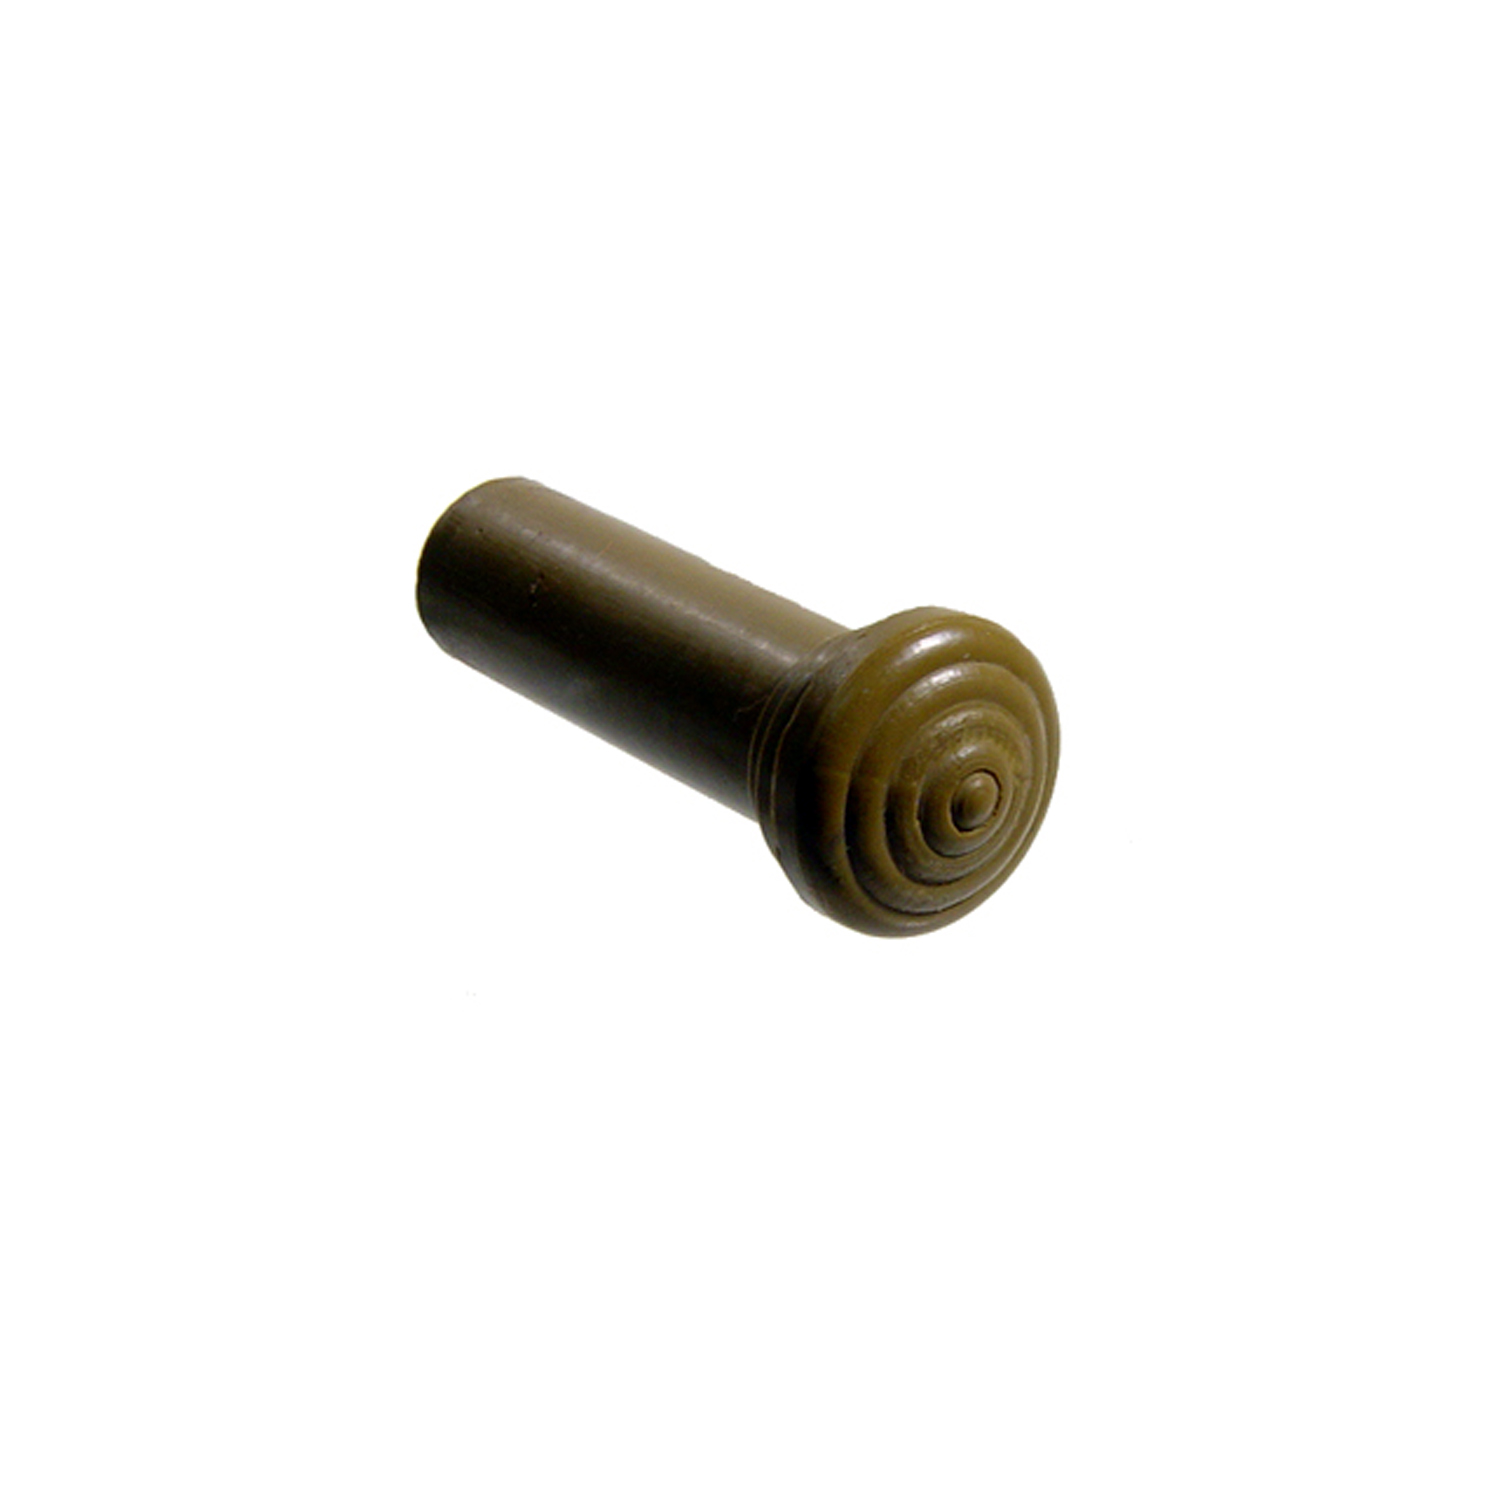 1941 Cadillac Series 60 Door Lock Knob.  Made of Olive Green rubber, self-threading-RP 304-G